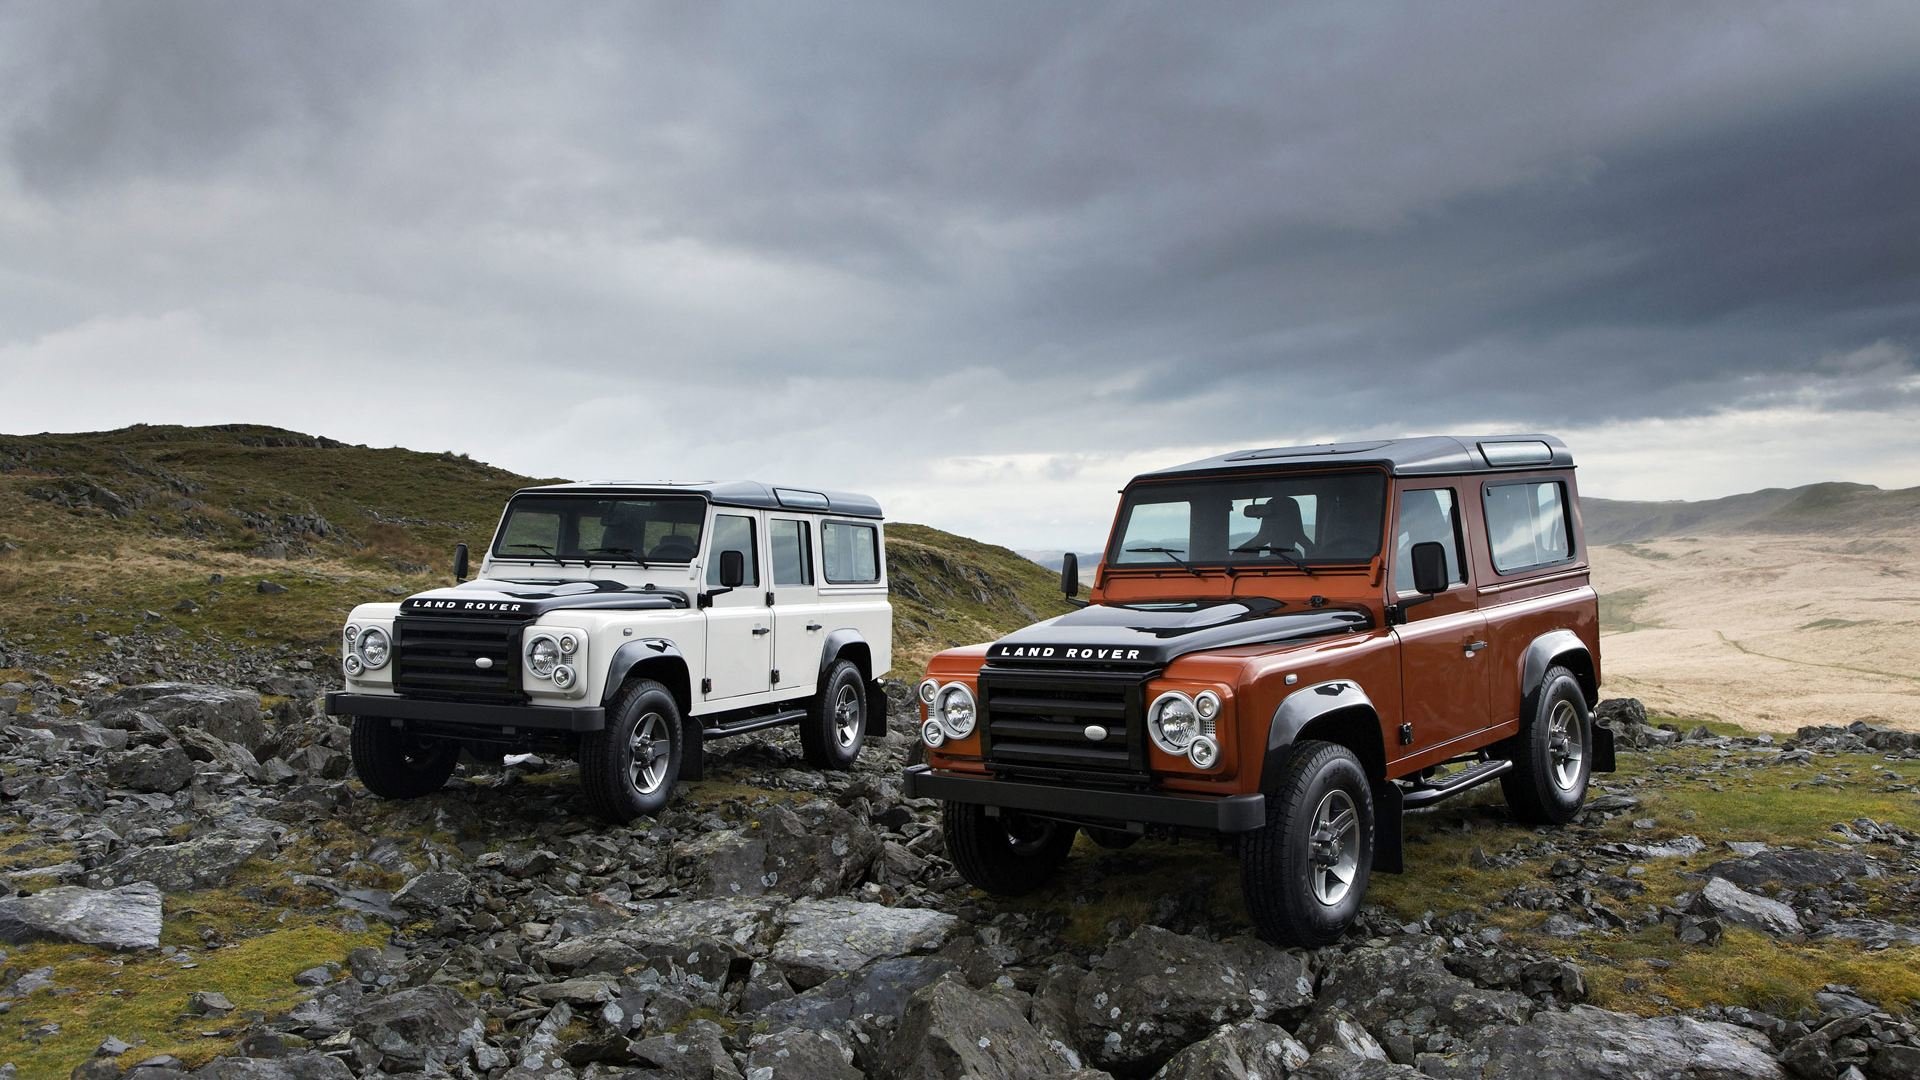 Best Land Rover Defender wallpaper ID:307778 for High Resolution hd 1080p computer